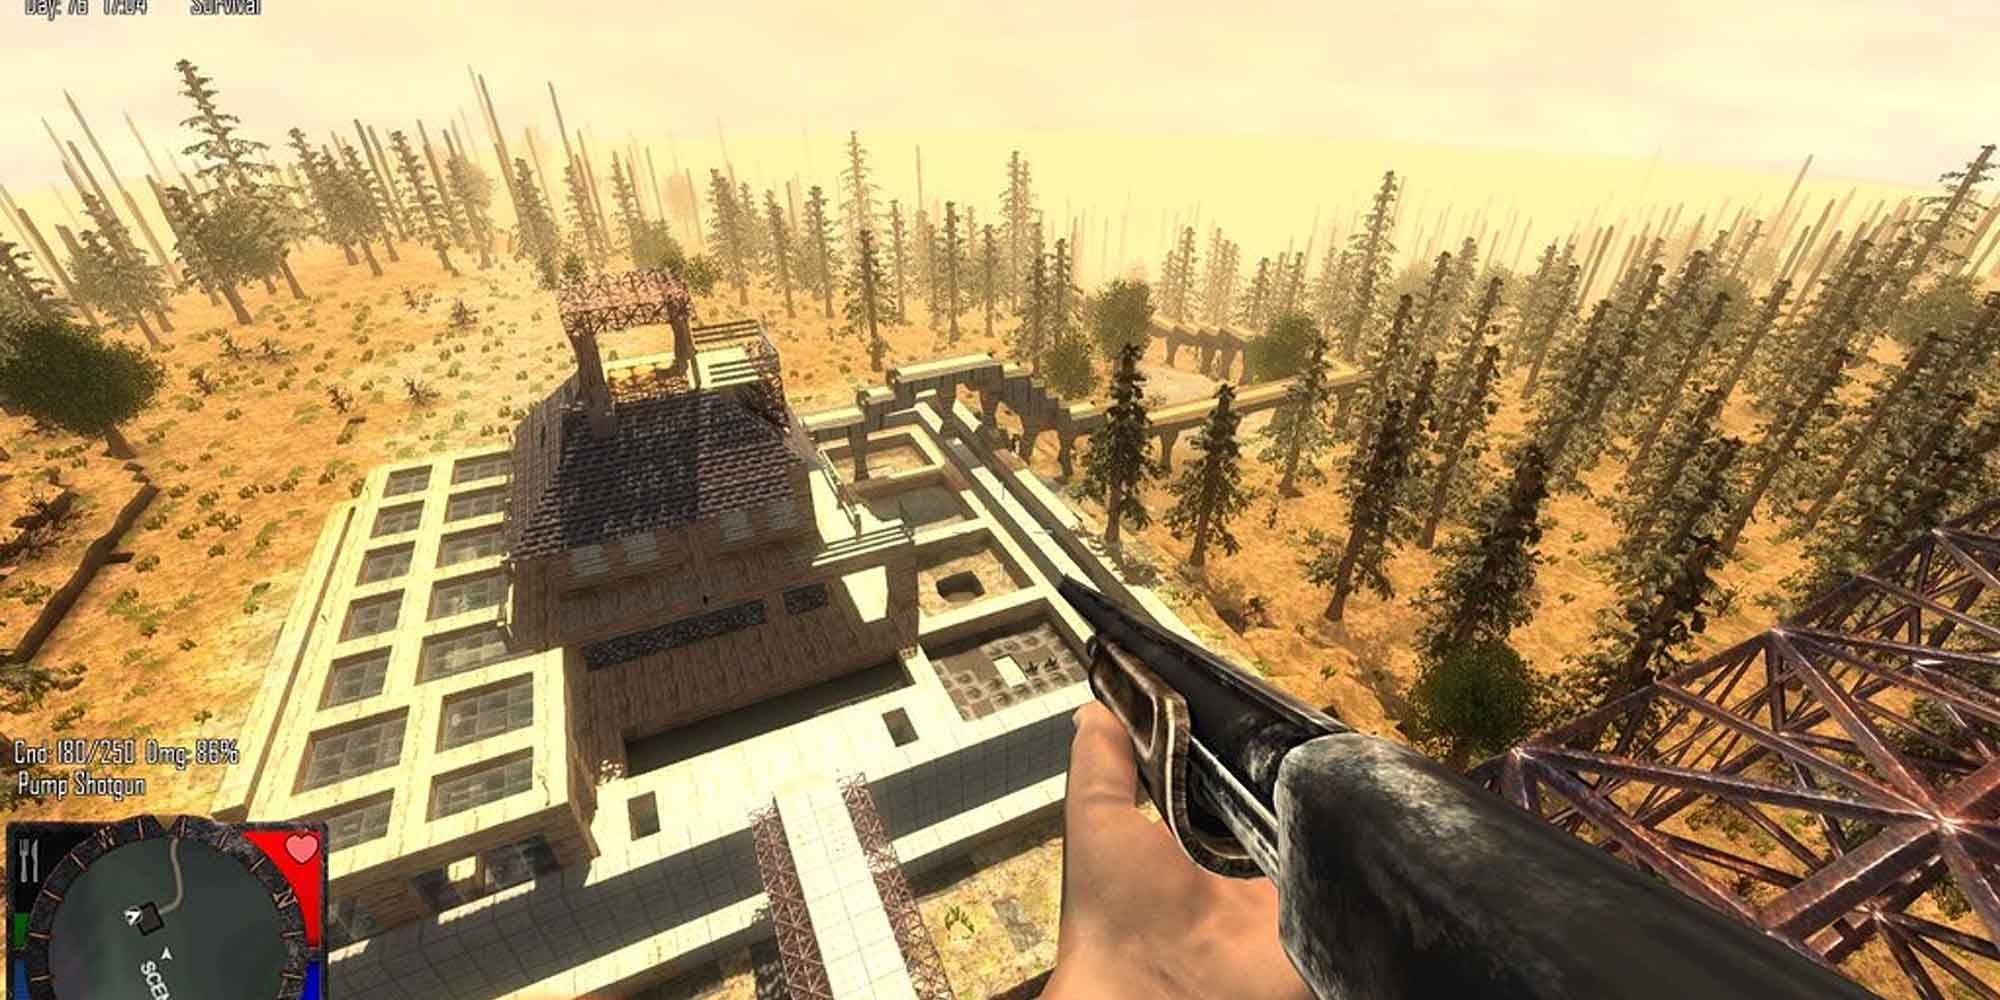 Overlooking a fortress with a Pump Shotgun in 7 Days to Die